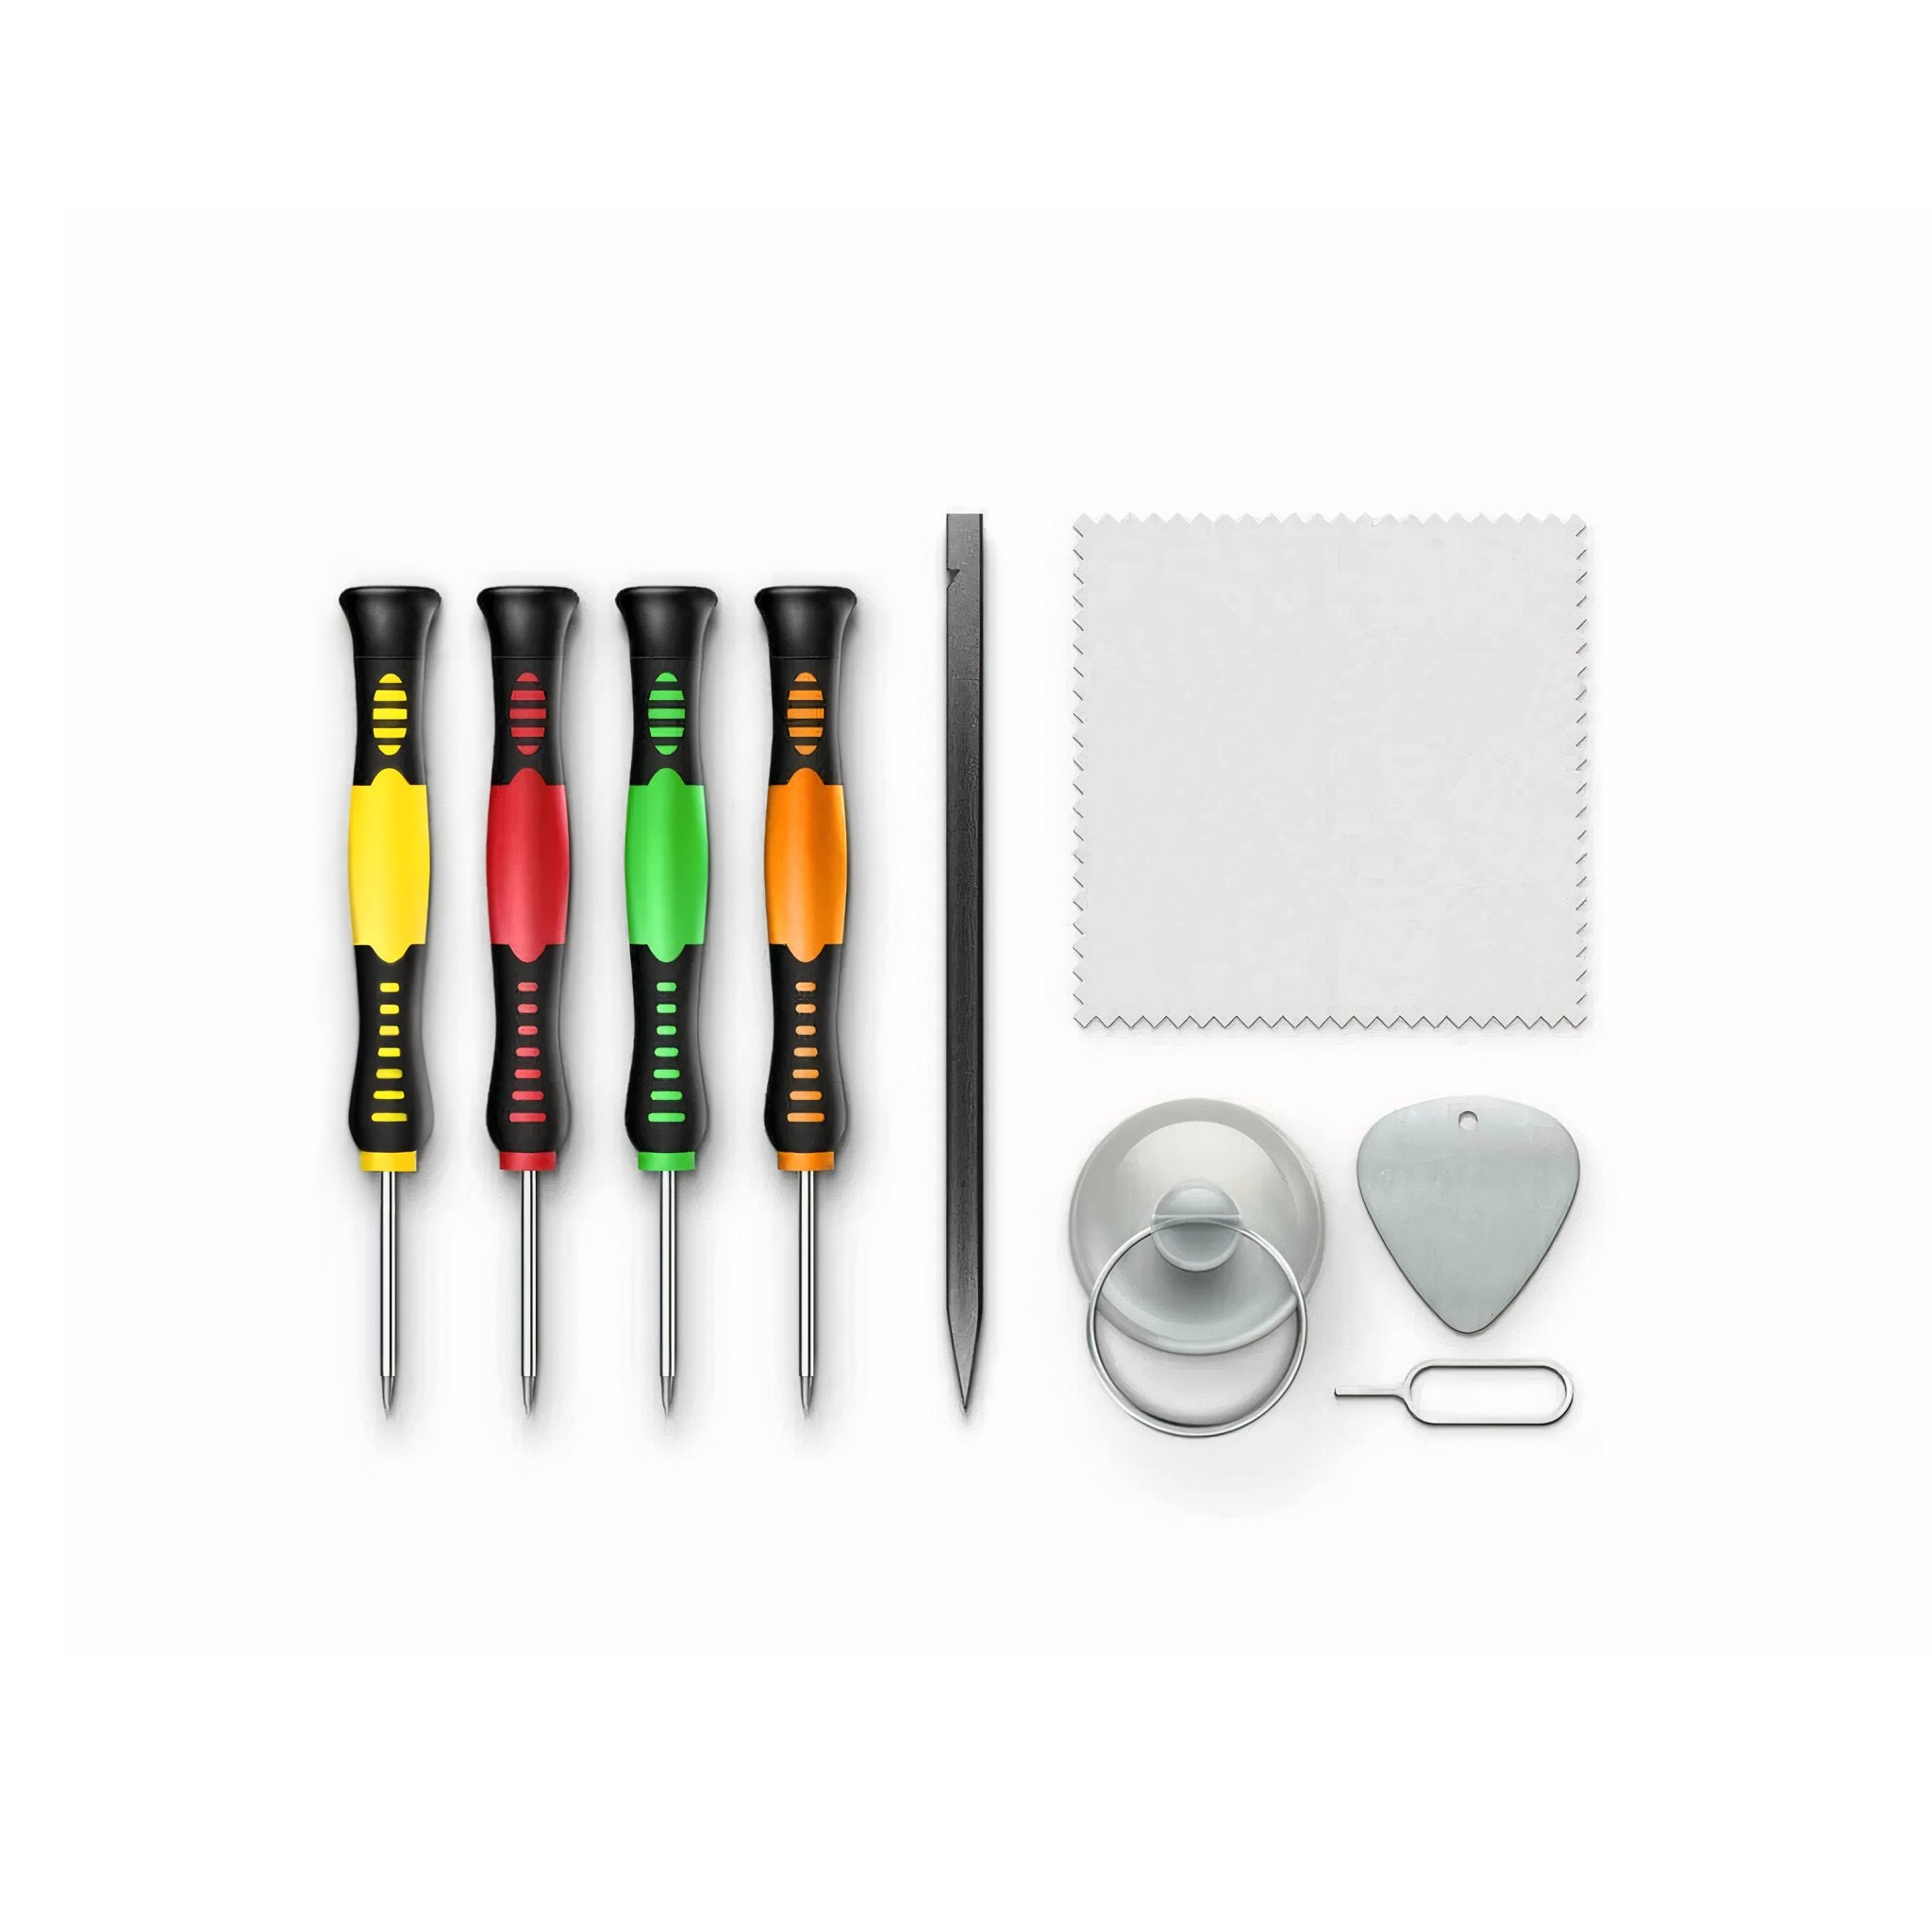 iPhone 6 Battery Replacement Kit - FixProvider